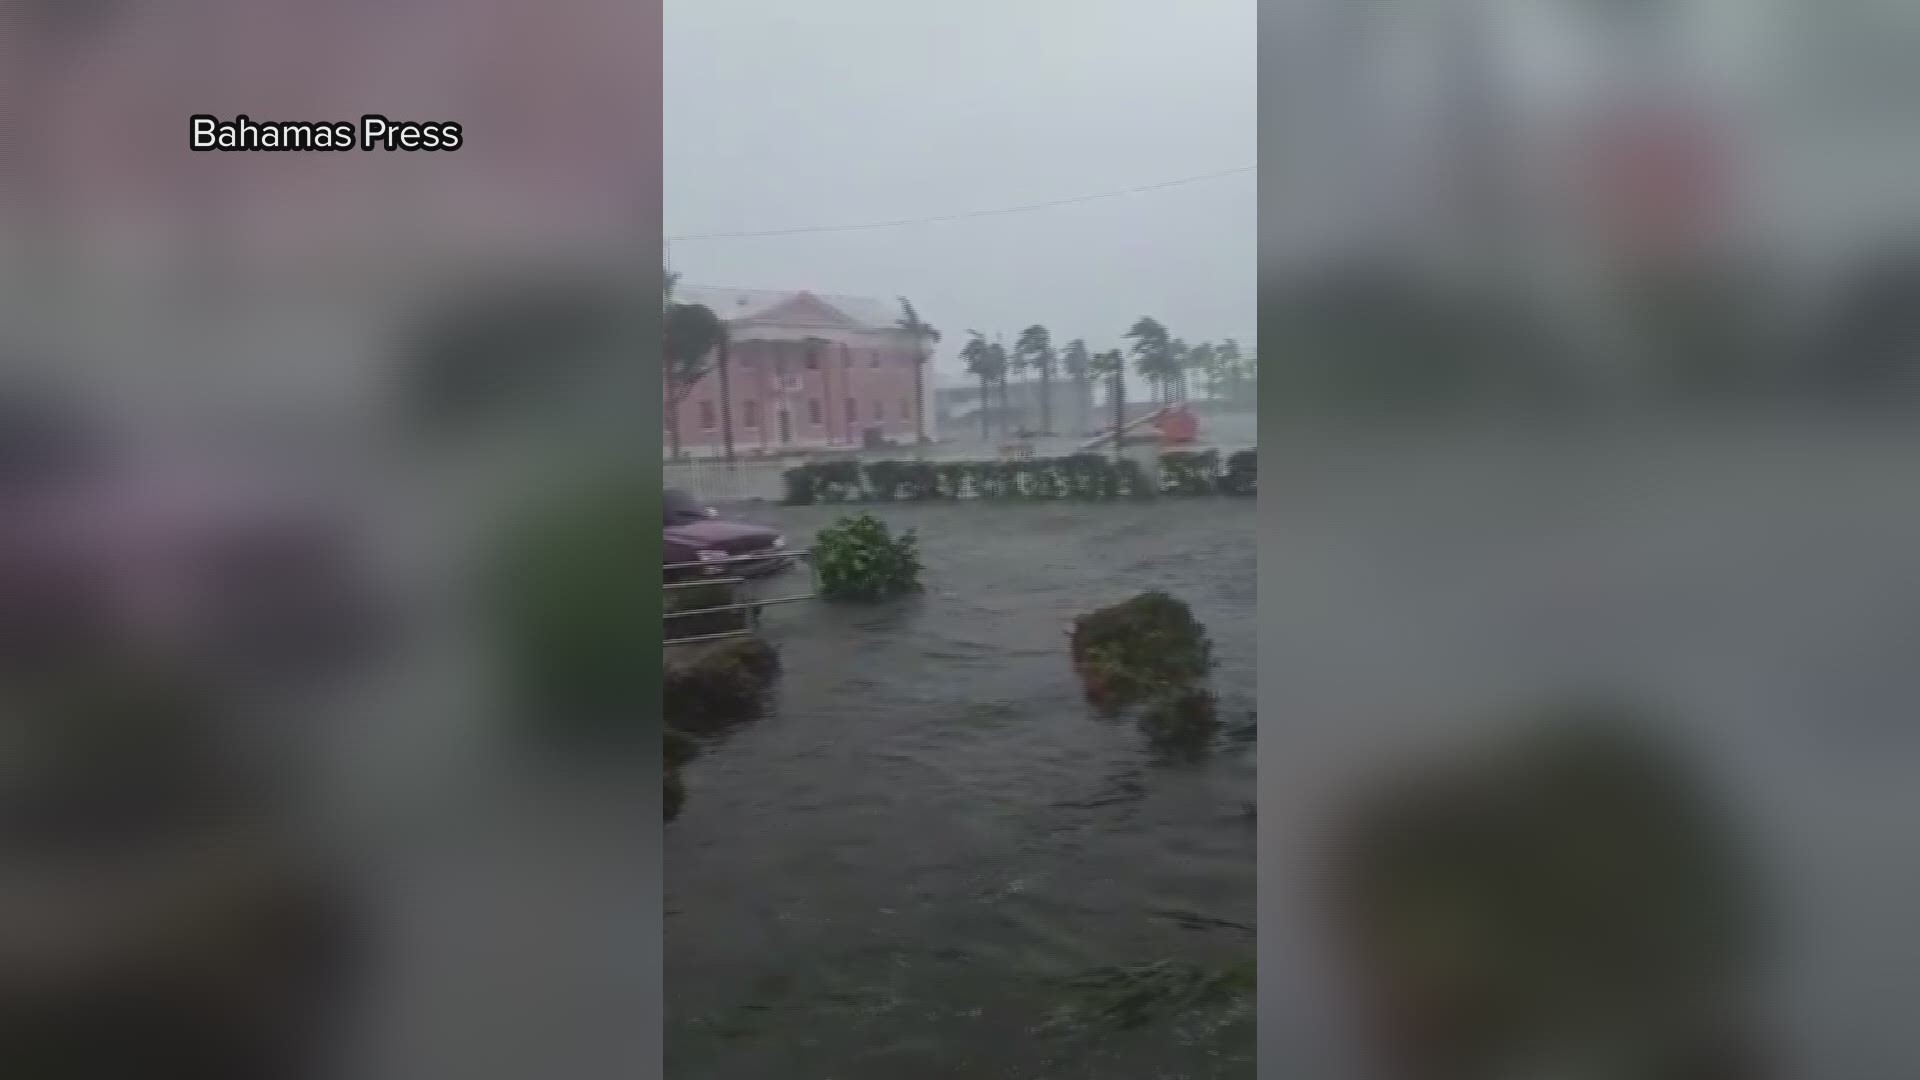 This video from the Bahamas Press shows the devastating flooding and debris in downtown Freeport after once-Category 5 Hurricane Dorian swept through the area.